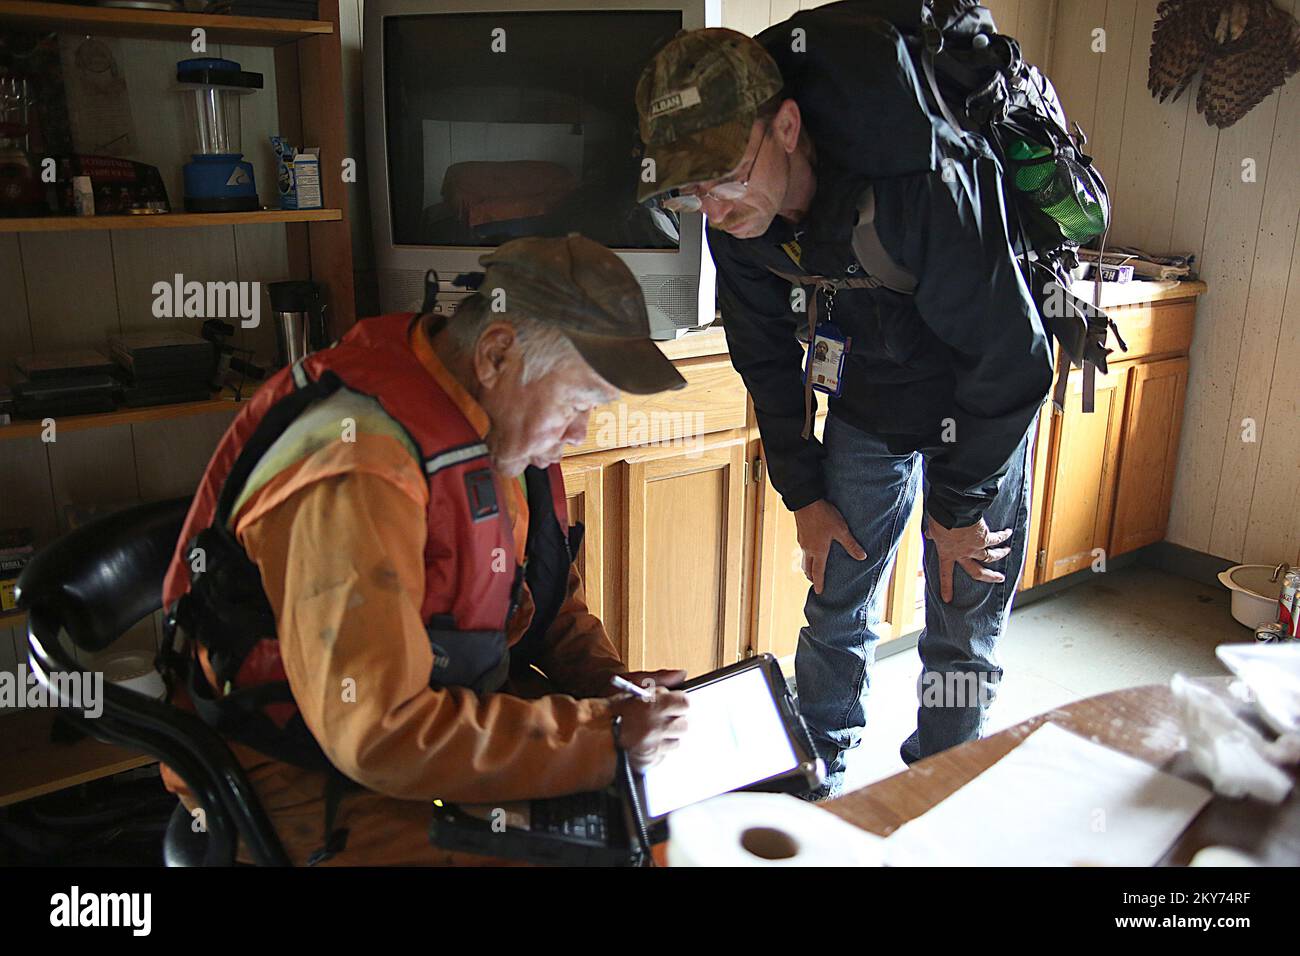 Hughes, Alaska, July 7, 2013   FEMA inspector Marty Williams is working with disaster survivor Ralph Williams by entering his damage data points with innovative tools like advanced field computers and software. Individuals and business owners who sustained losses in the designated area can begin applying for assistance by registering at www.disasterassistance.gov or by calling 1-800-621-FEMA (3362). Adam Dubrowa/ FEMA.. Photographs Relating to Disasters and Emergency Management Programs, Activities, and Officials Stock Photo